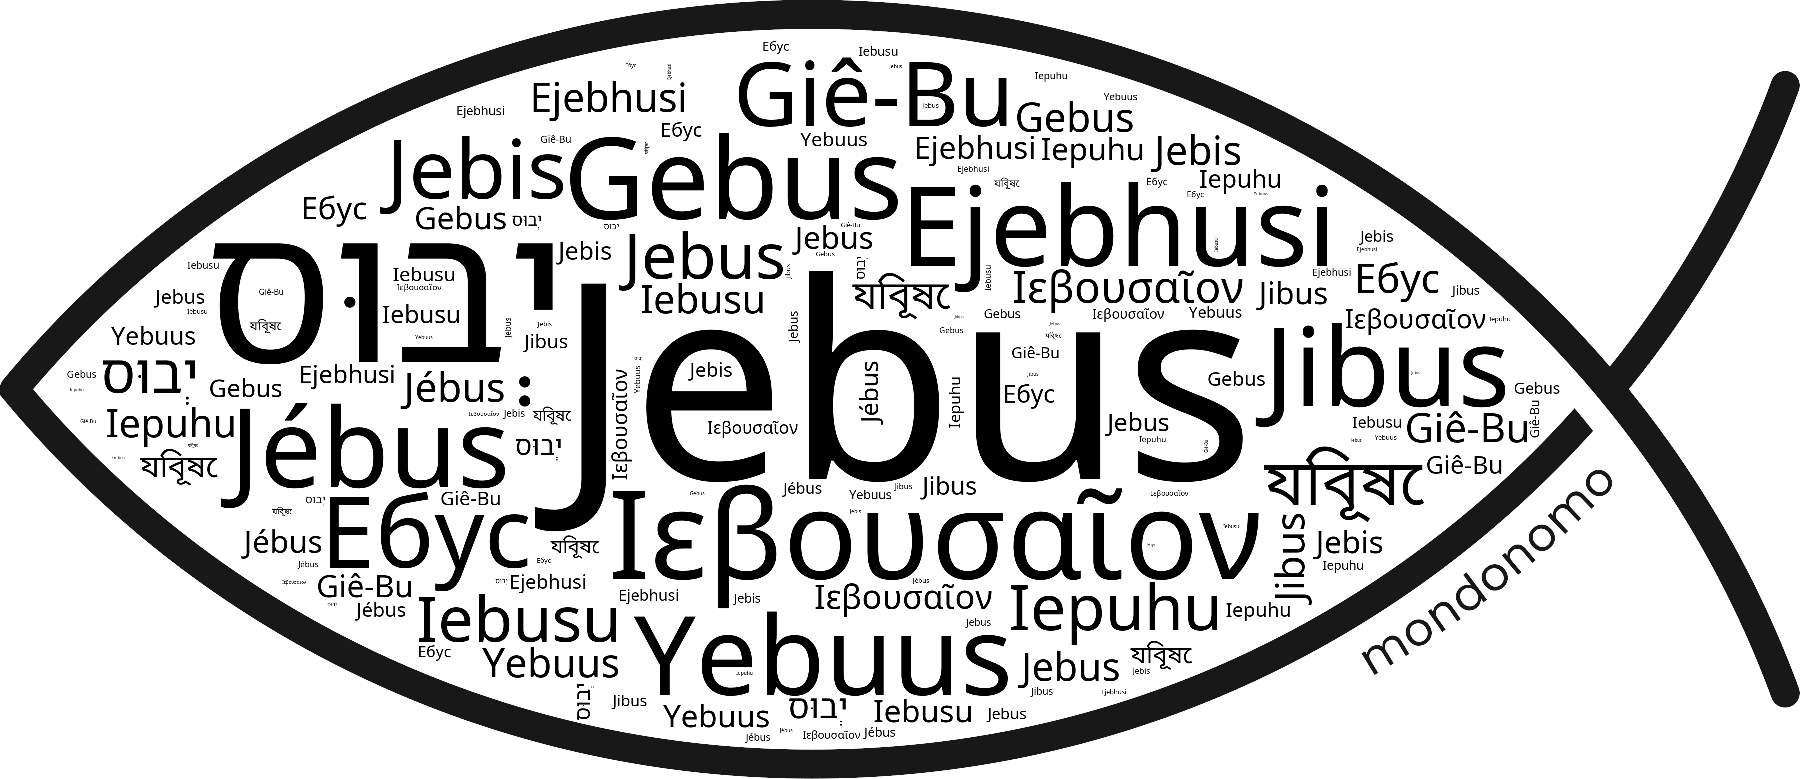 Name Jebus in the world's Bibles